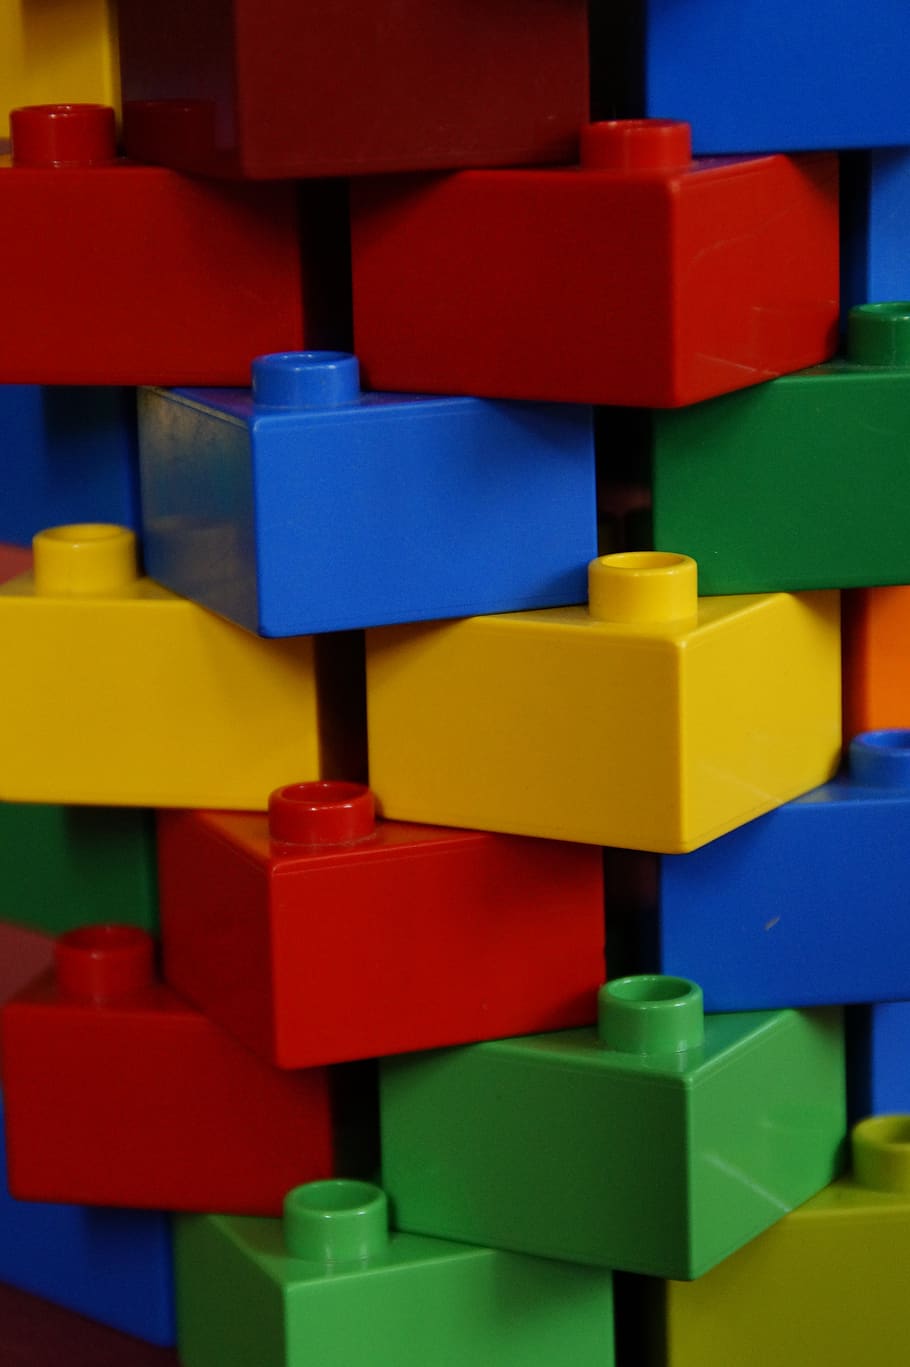 tower, stone wall, lego blocks, colorful, child, children toys, play, toys, stones, duplo